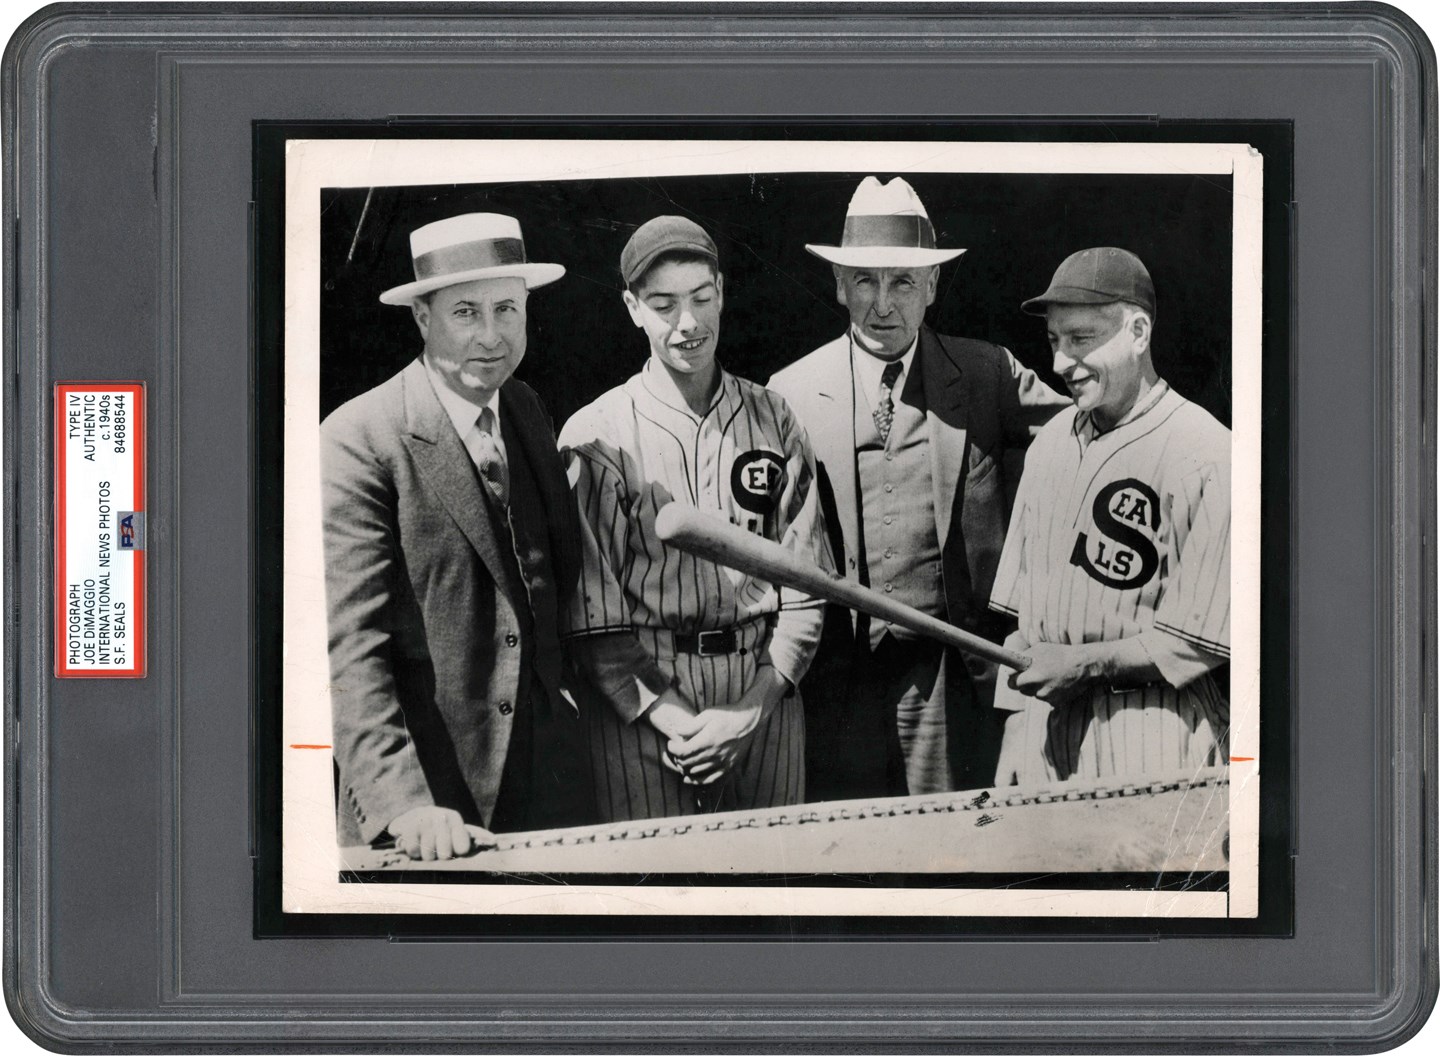 Vintage Sports Photographs - One of the Earliest Known Professional Baseball Photographs of Joe DiMaggio (PSA Type IV)